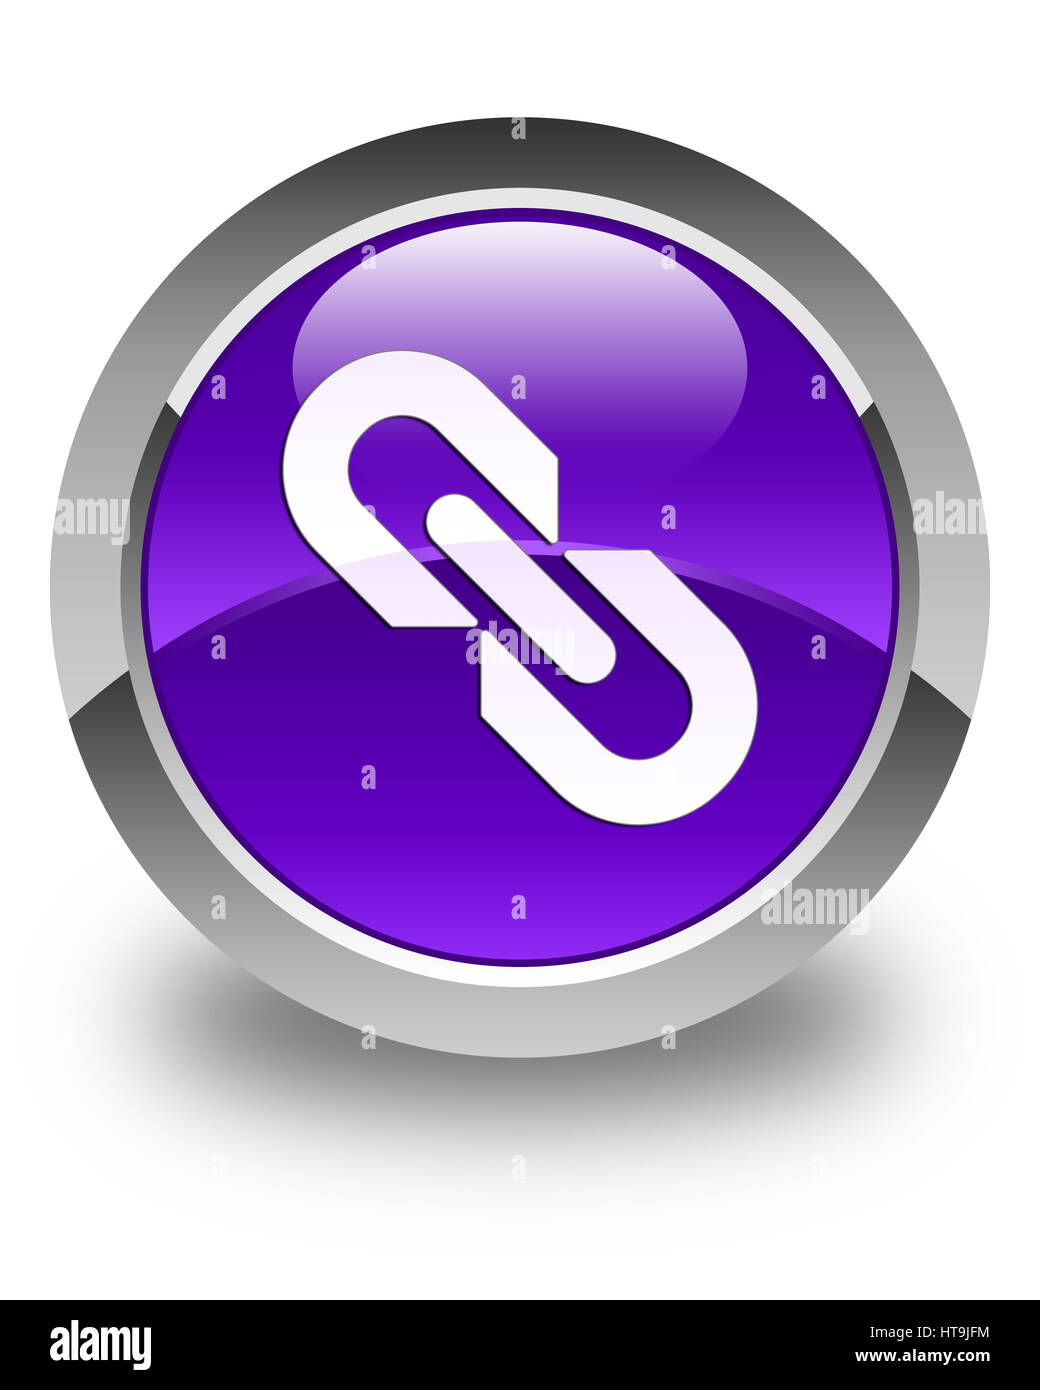 Link icon isolated on glossy purple round button abstract illustration Stock Photo